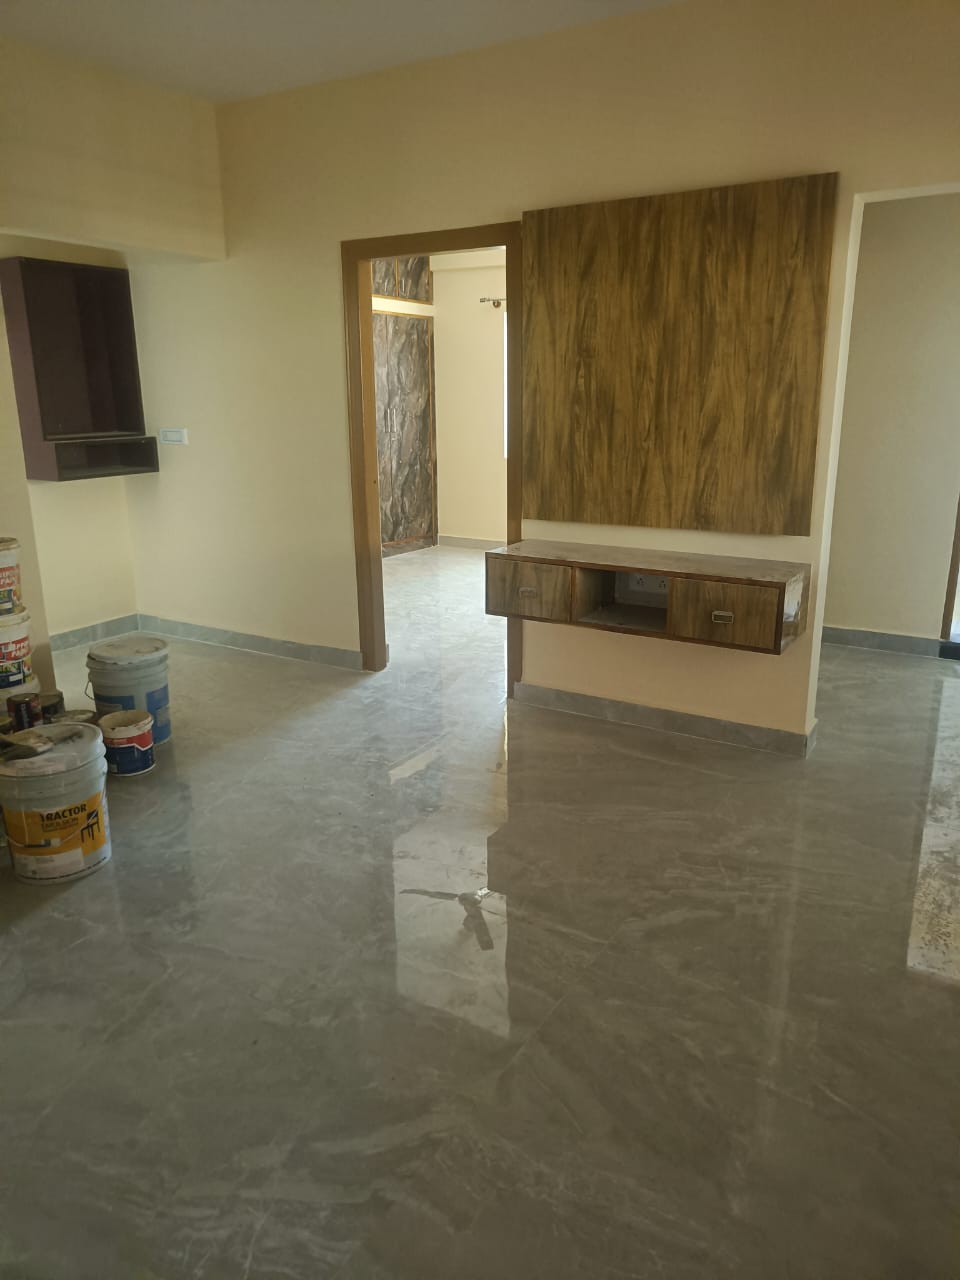 2 BHK Independent House for Lease Only at JAML2 - 2645 in Dinnur